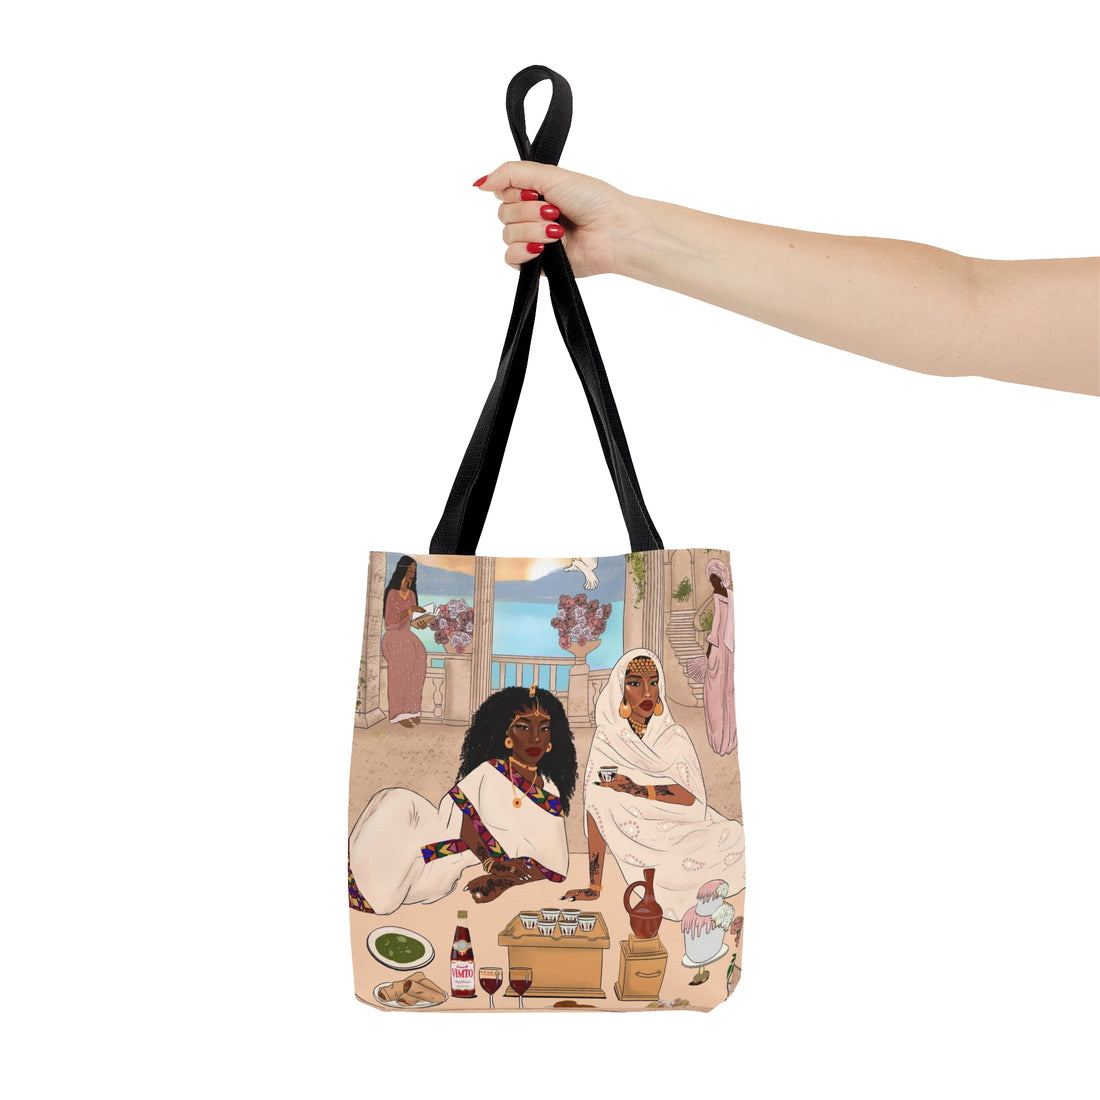 A Breakfast in Time - Tote Bag